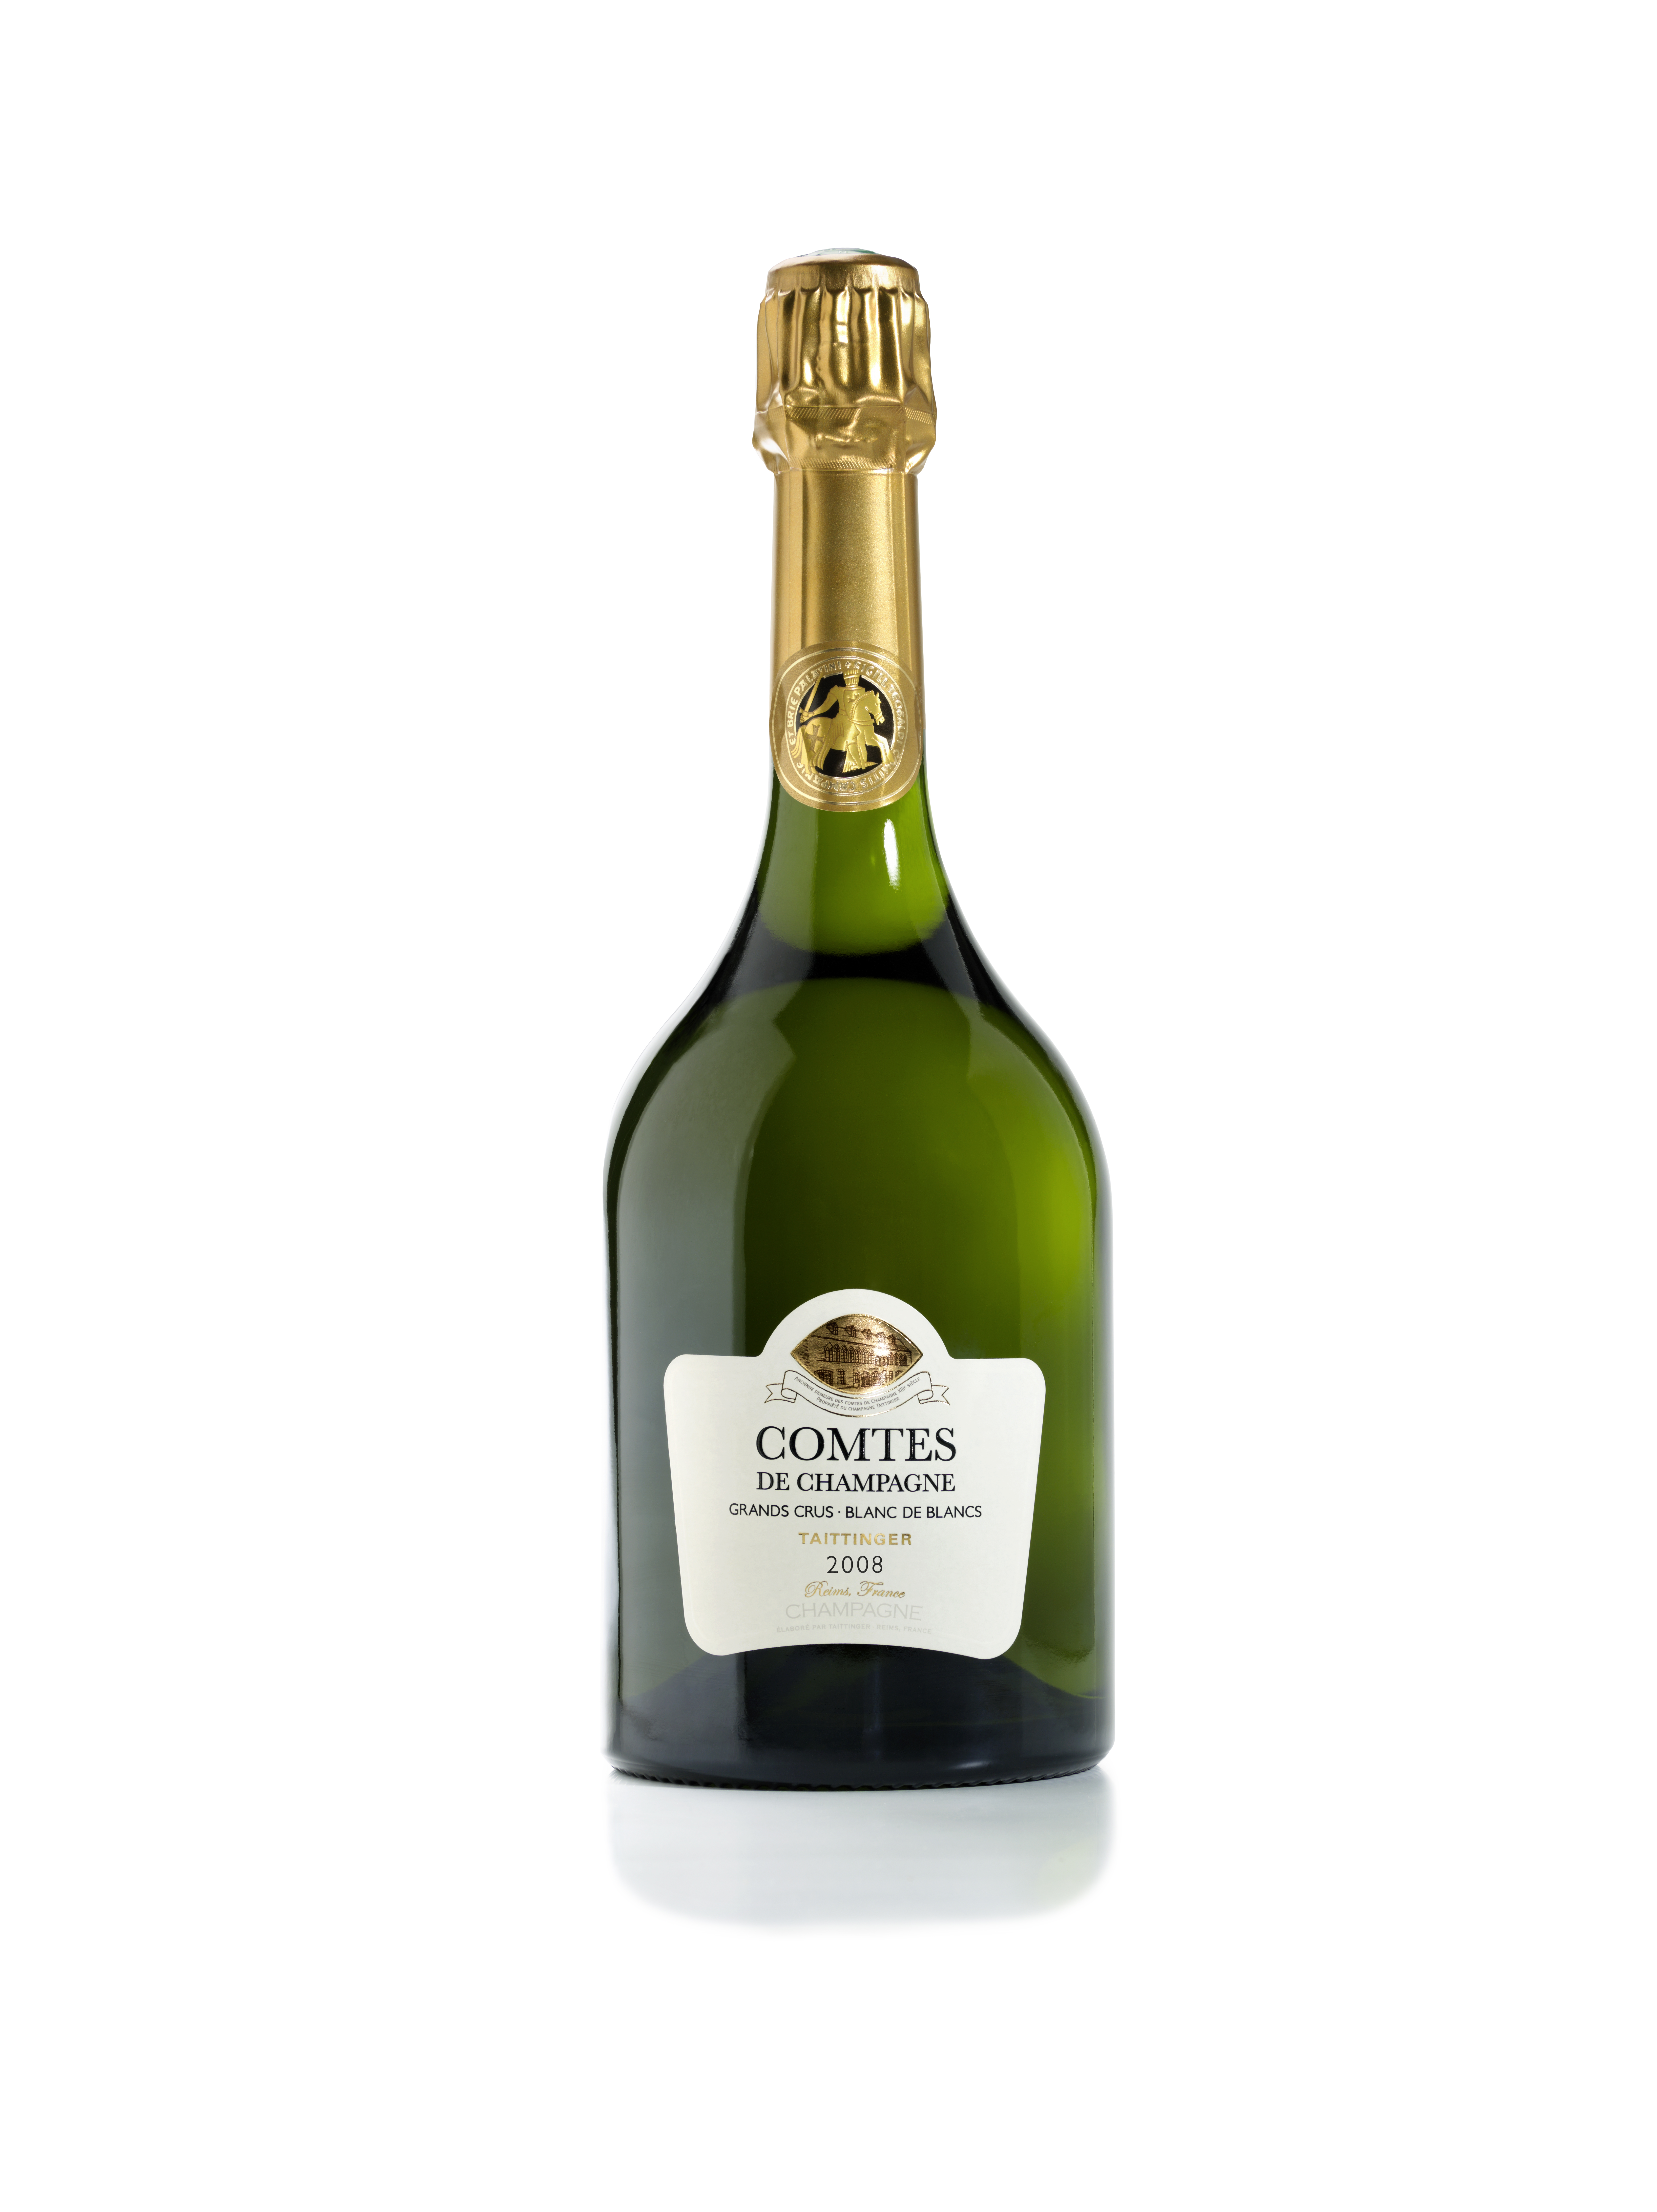 SIA launches Taittinger Comtes de Champagne in first class